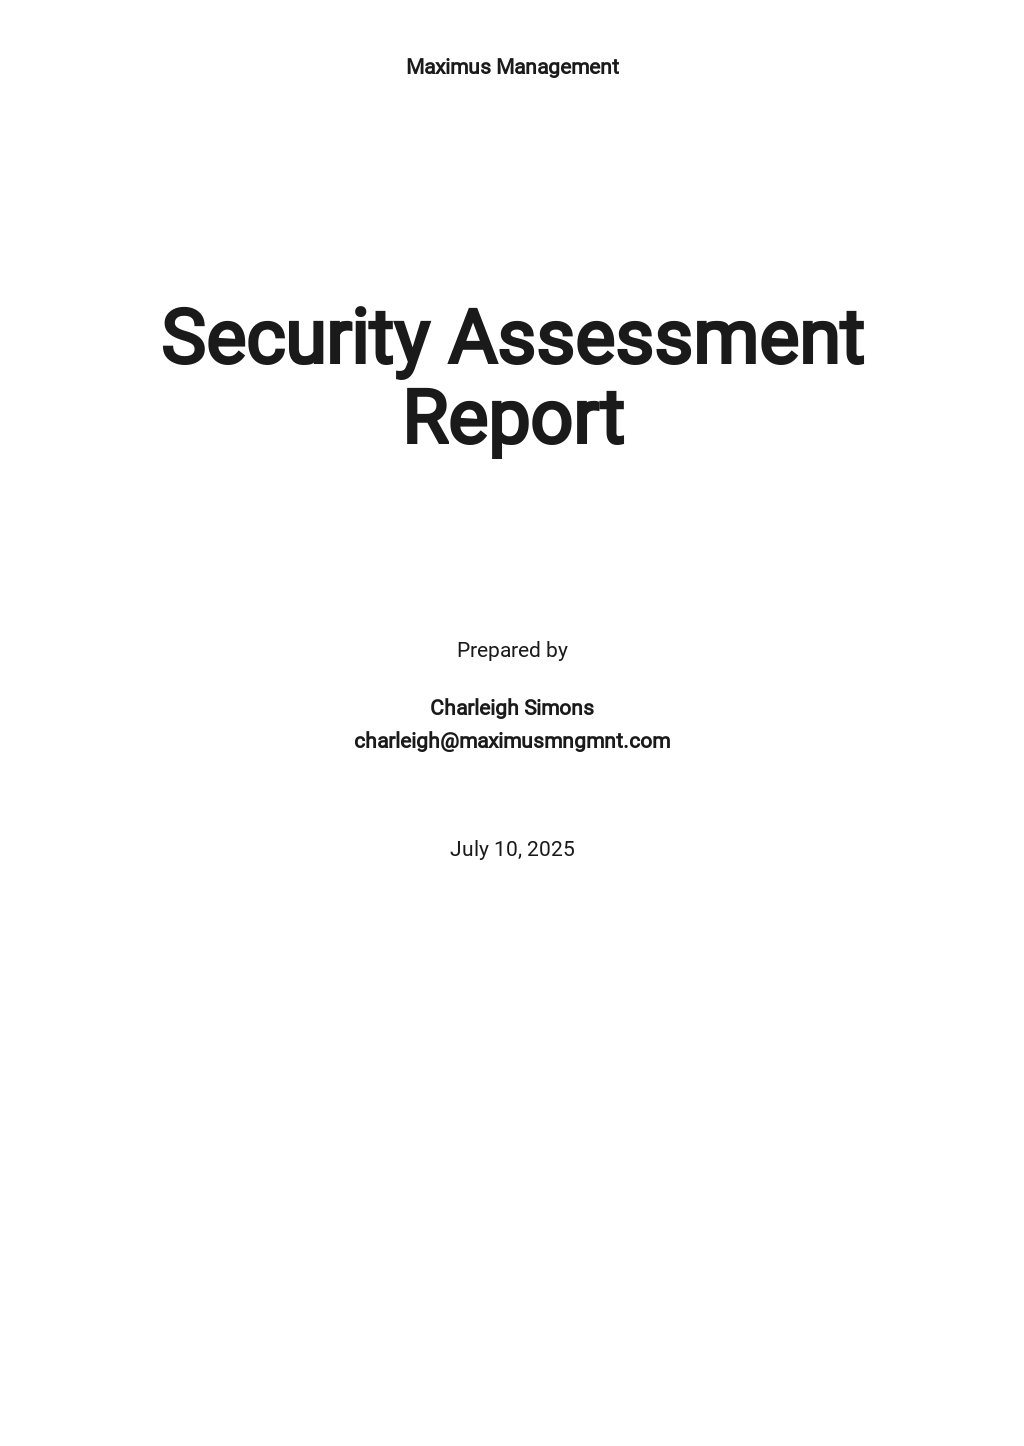 FREE Security Report Templates in PDF